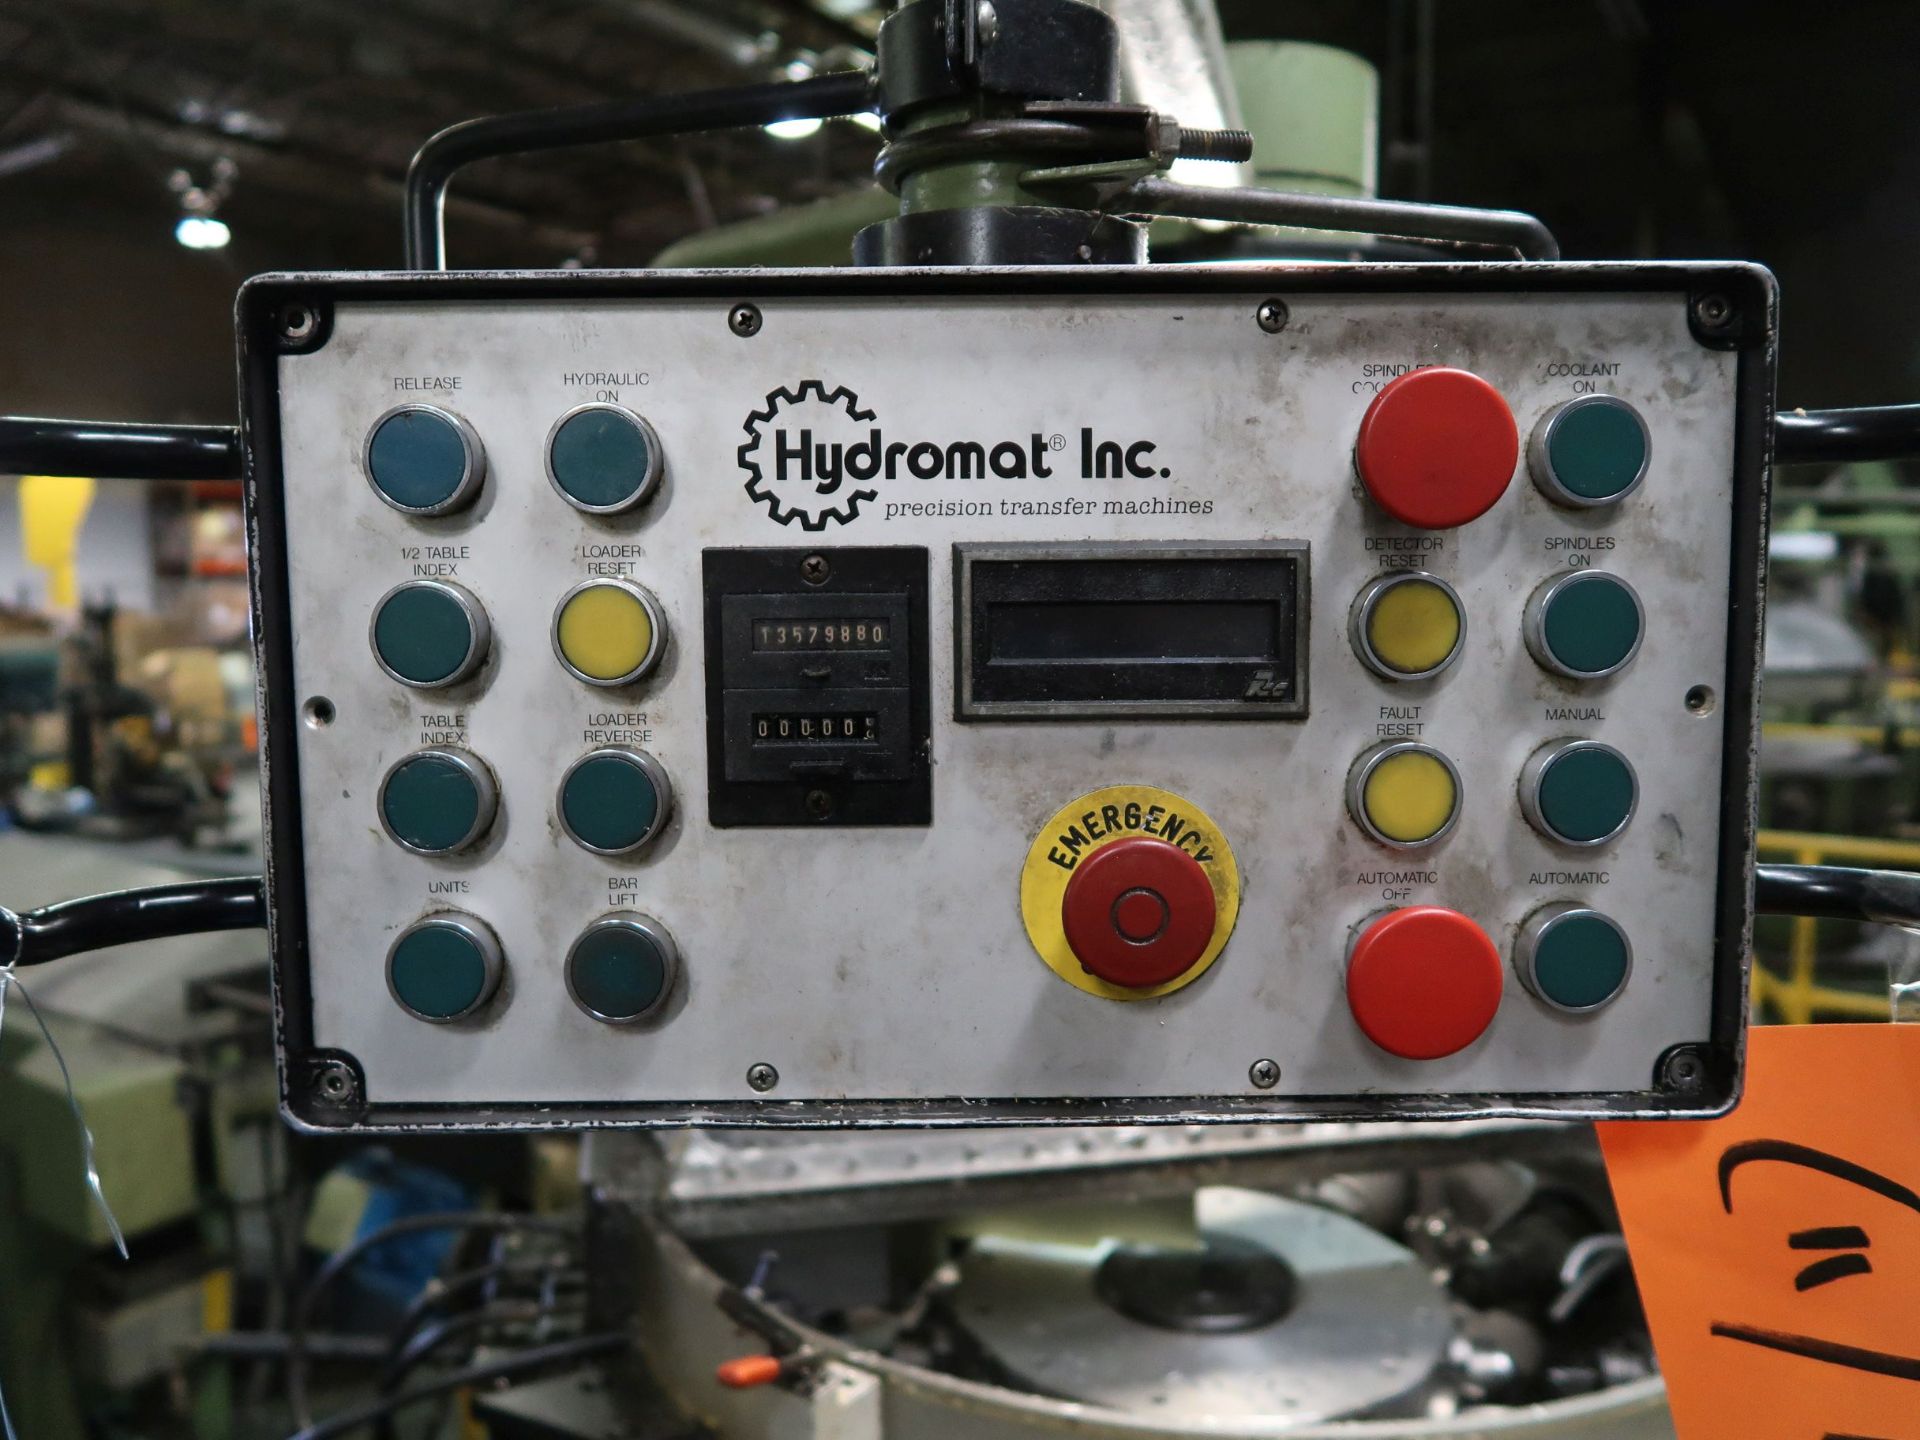 HYDROMAT MODEL HB45 12-STATION ROTARY TRANSFER MACHINE; S/N 155, PB CONTROL, 13,579,880 ON - Image 6 of 14